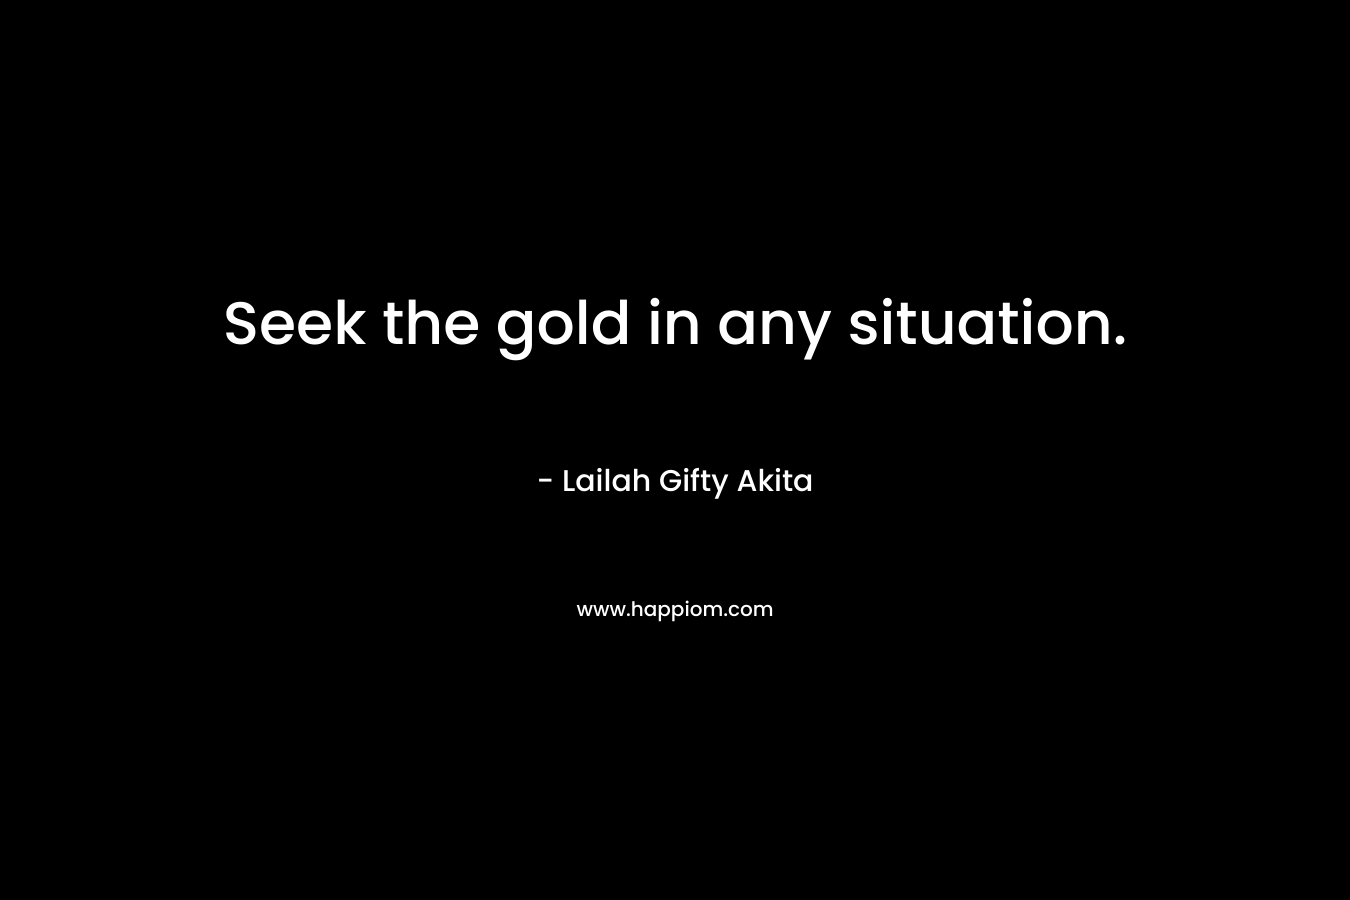 Seek the gold in any situation.